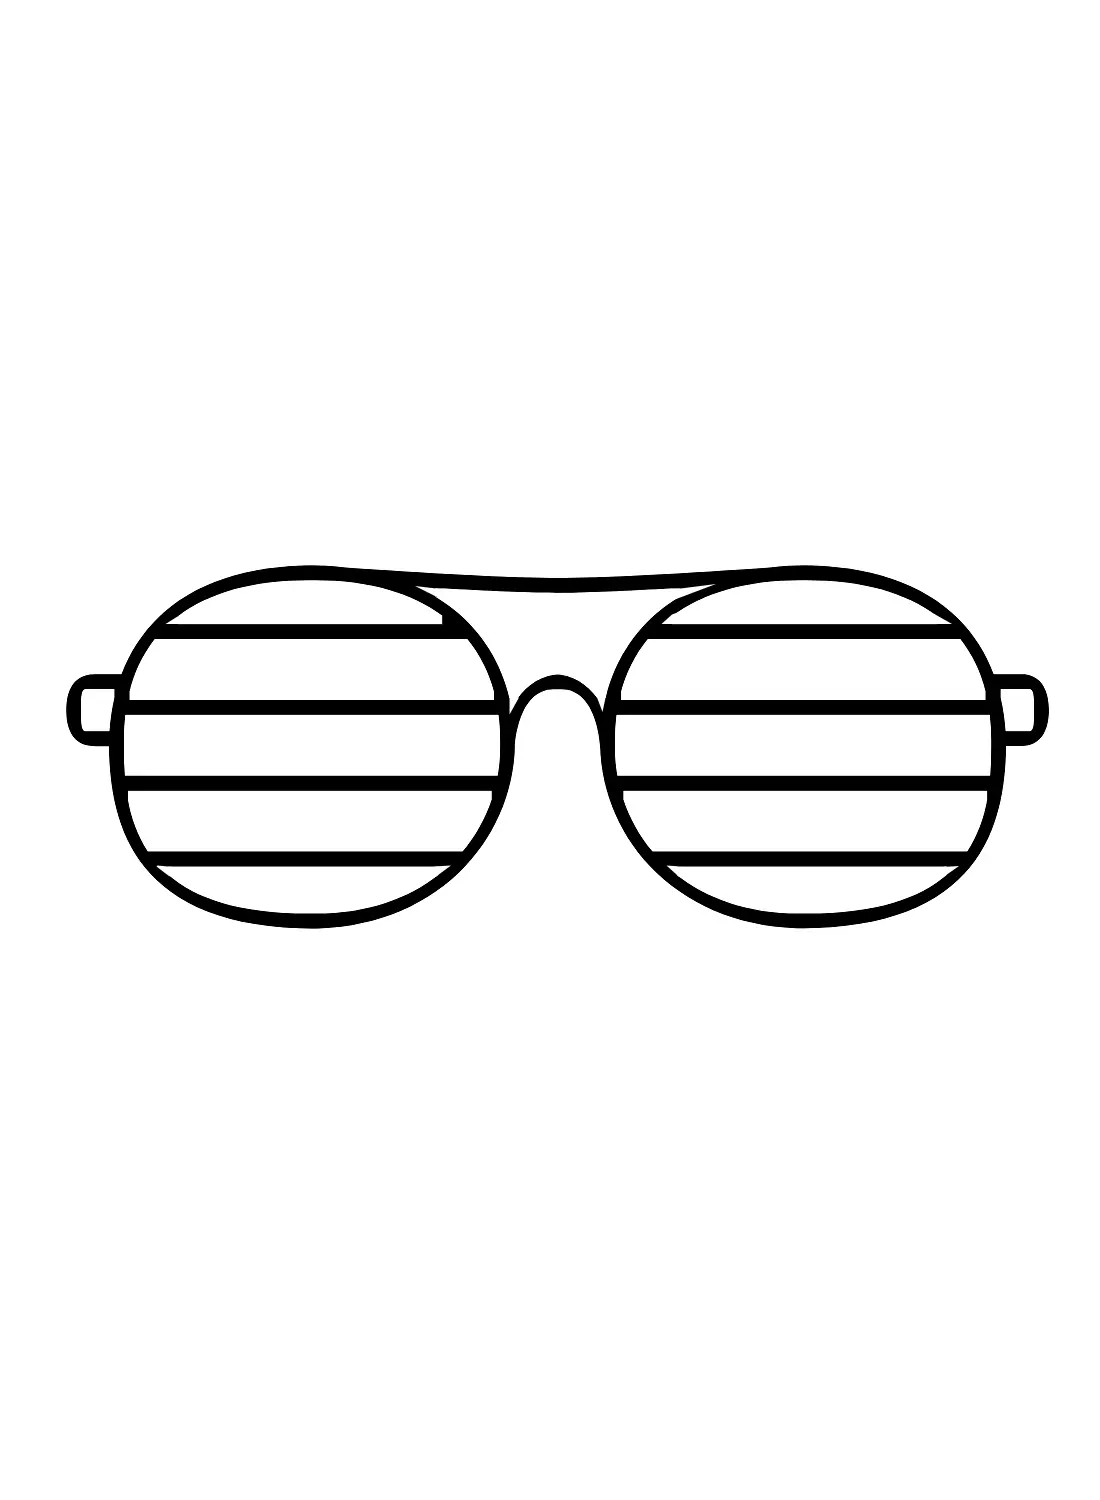 Sunglasses Coloring Pages